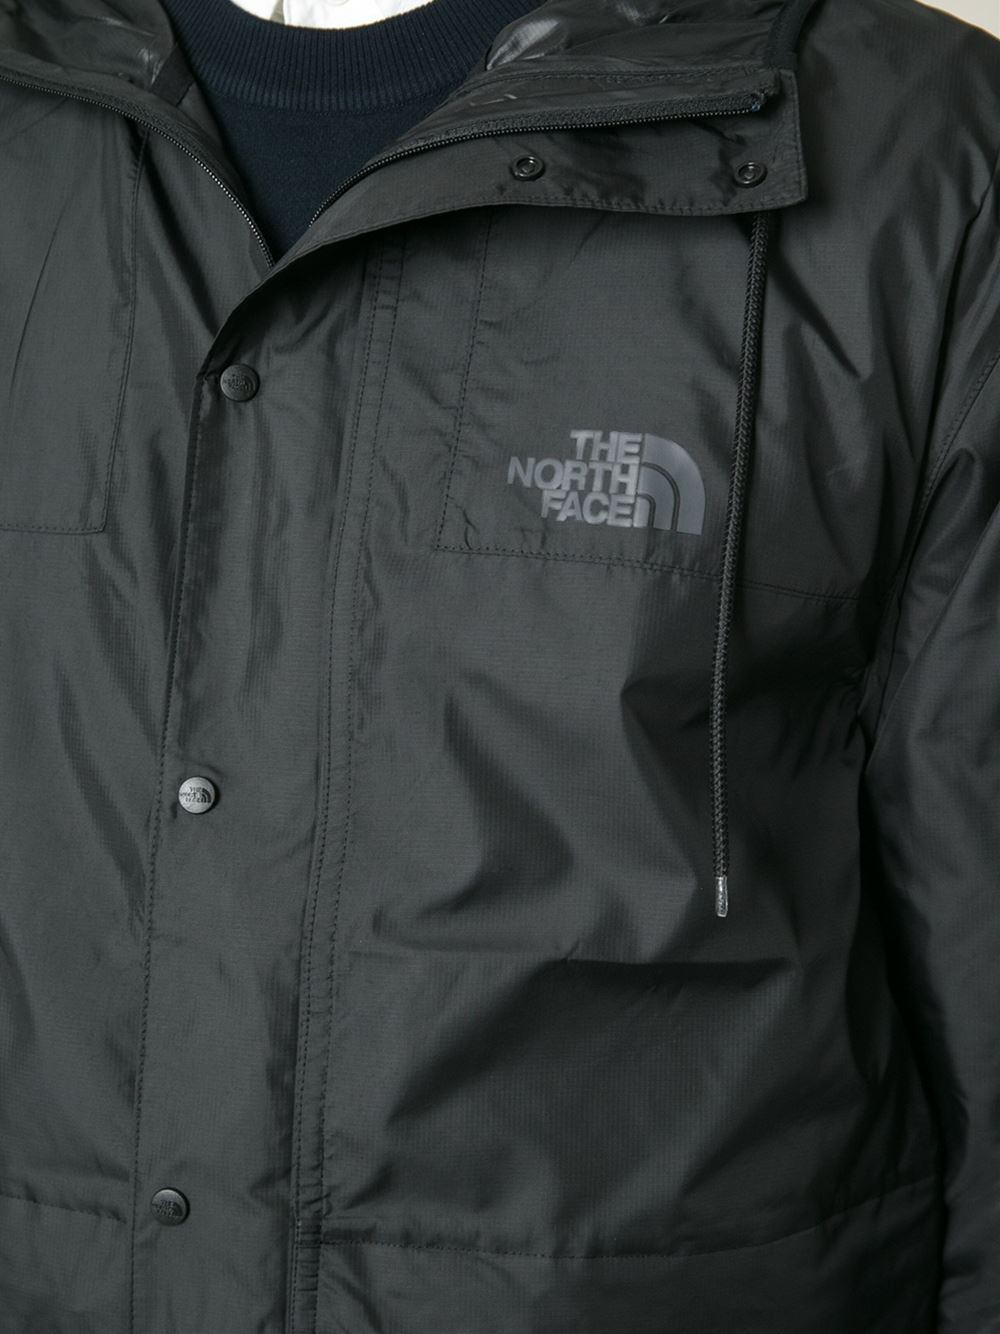 The North Face Hooded Windbreaker Jacket in Black for Men - Lyst